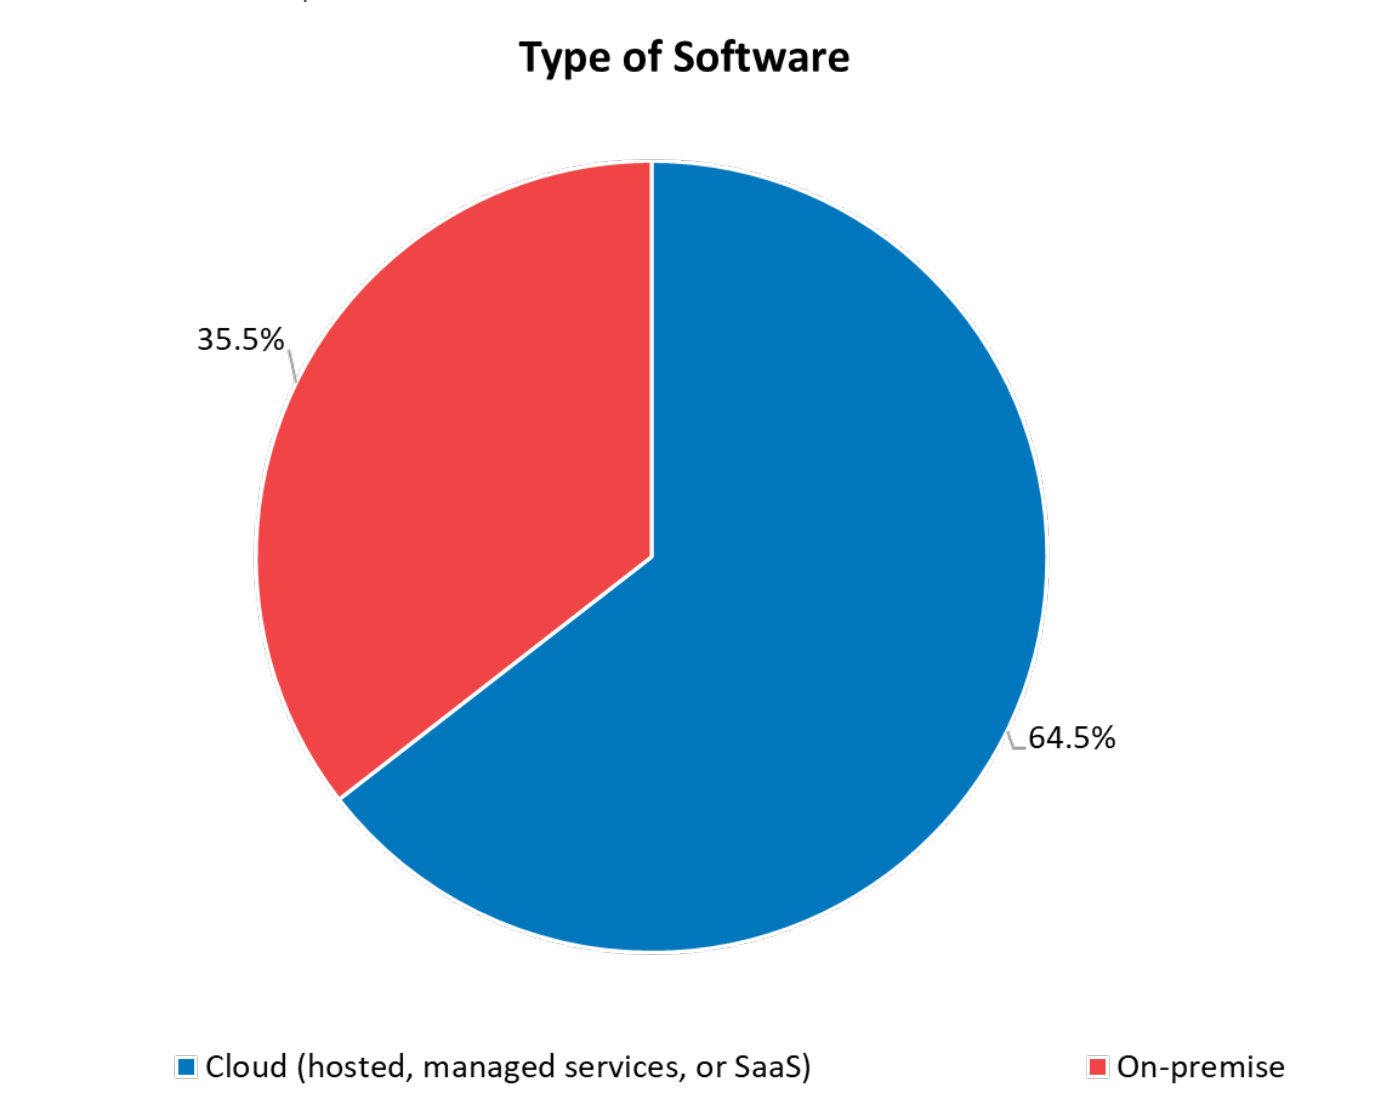 Pie chart of software hosted on cloud vs. on-premise